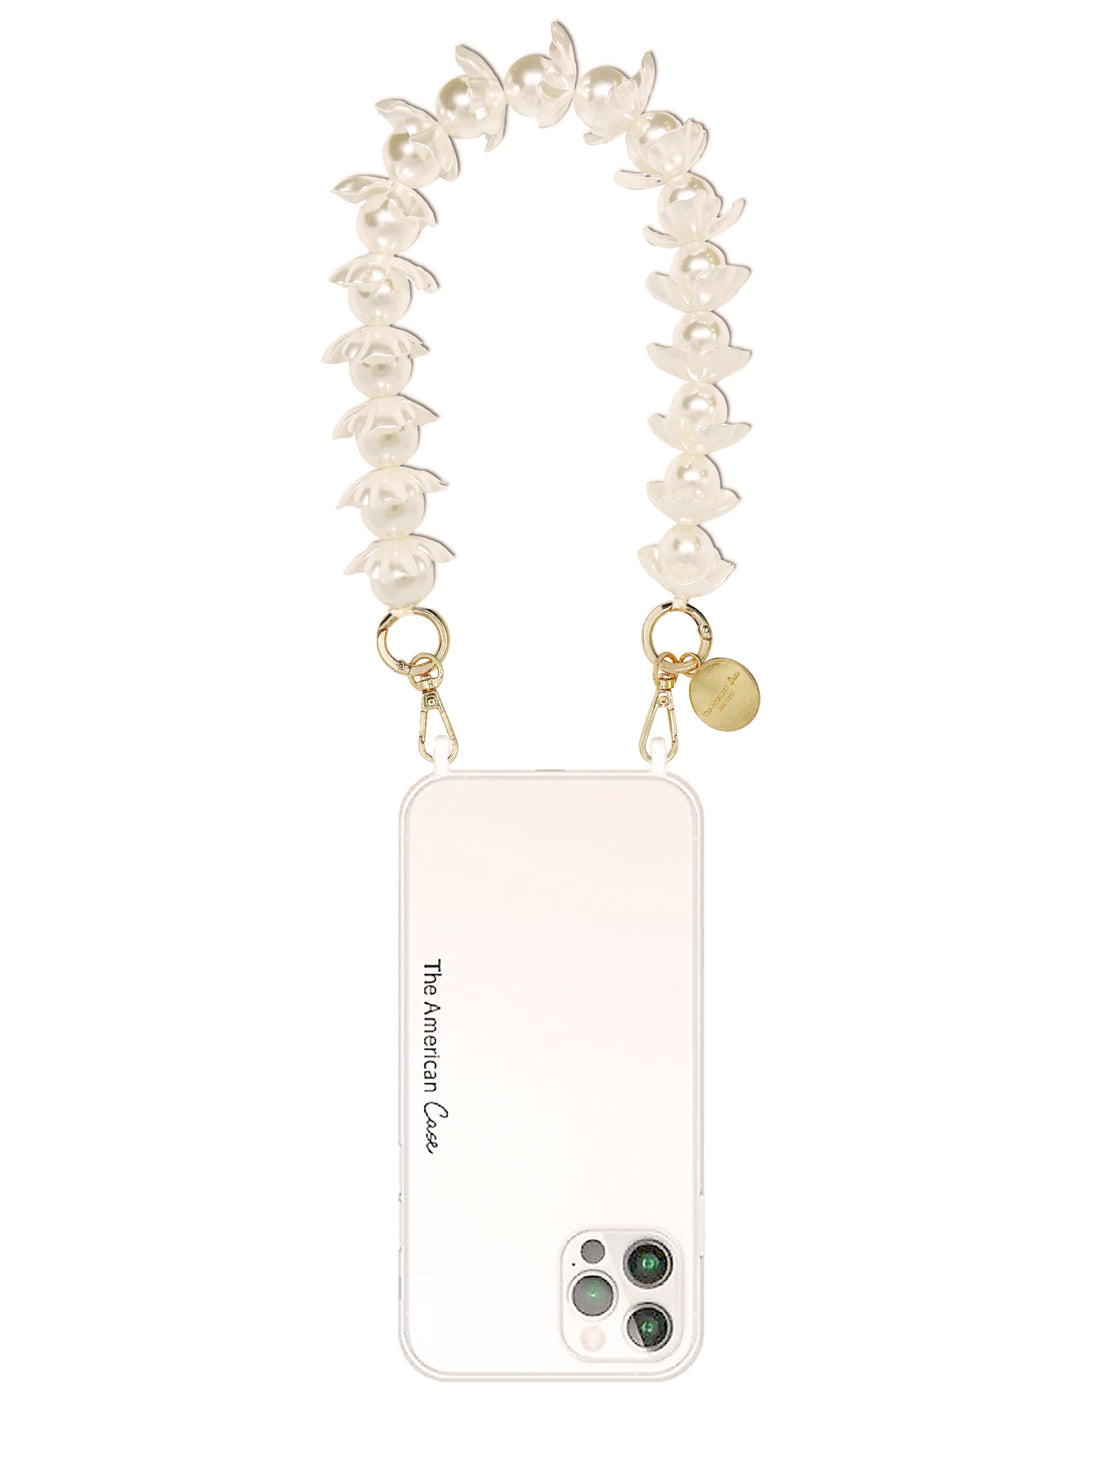 Fiona - Flower Pearl Bead Bracelet Phone Chain with Golden Carabiners